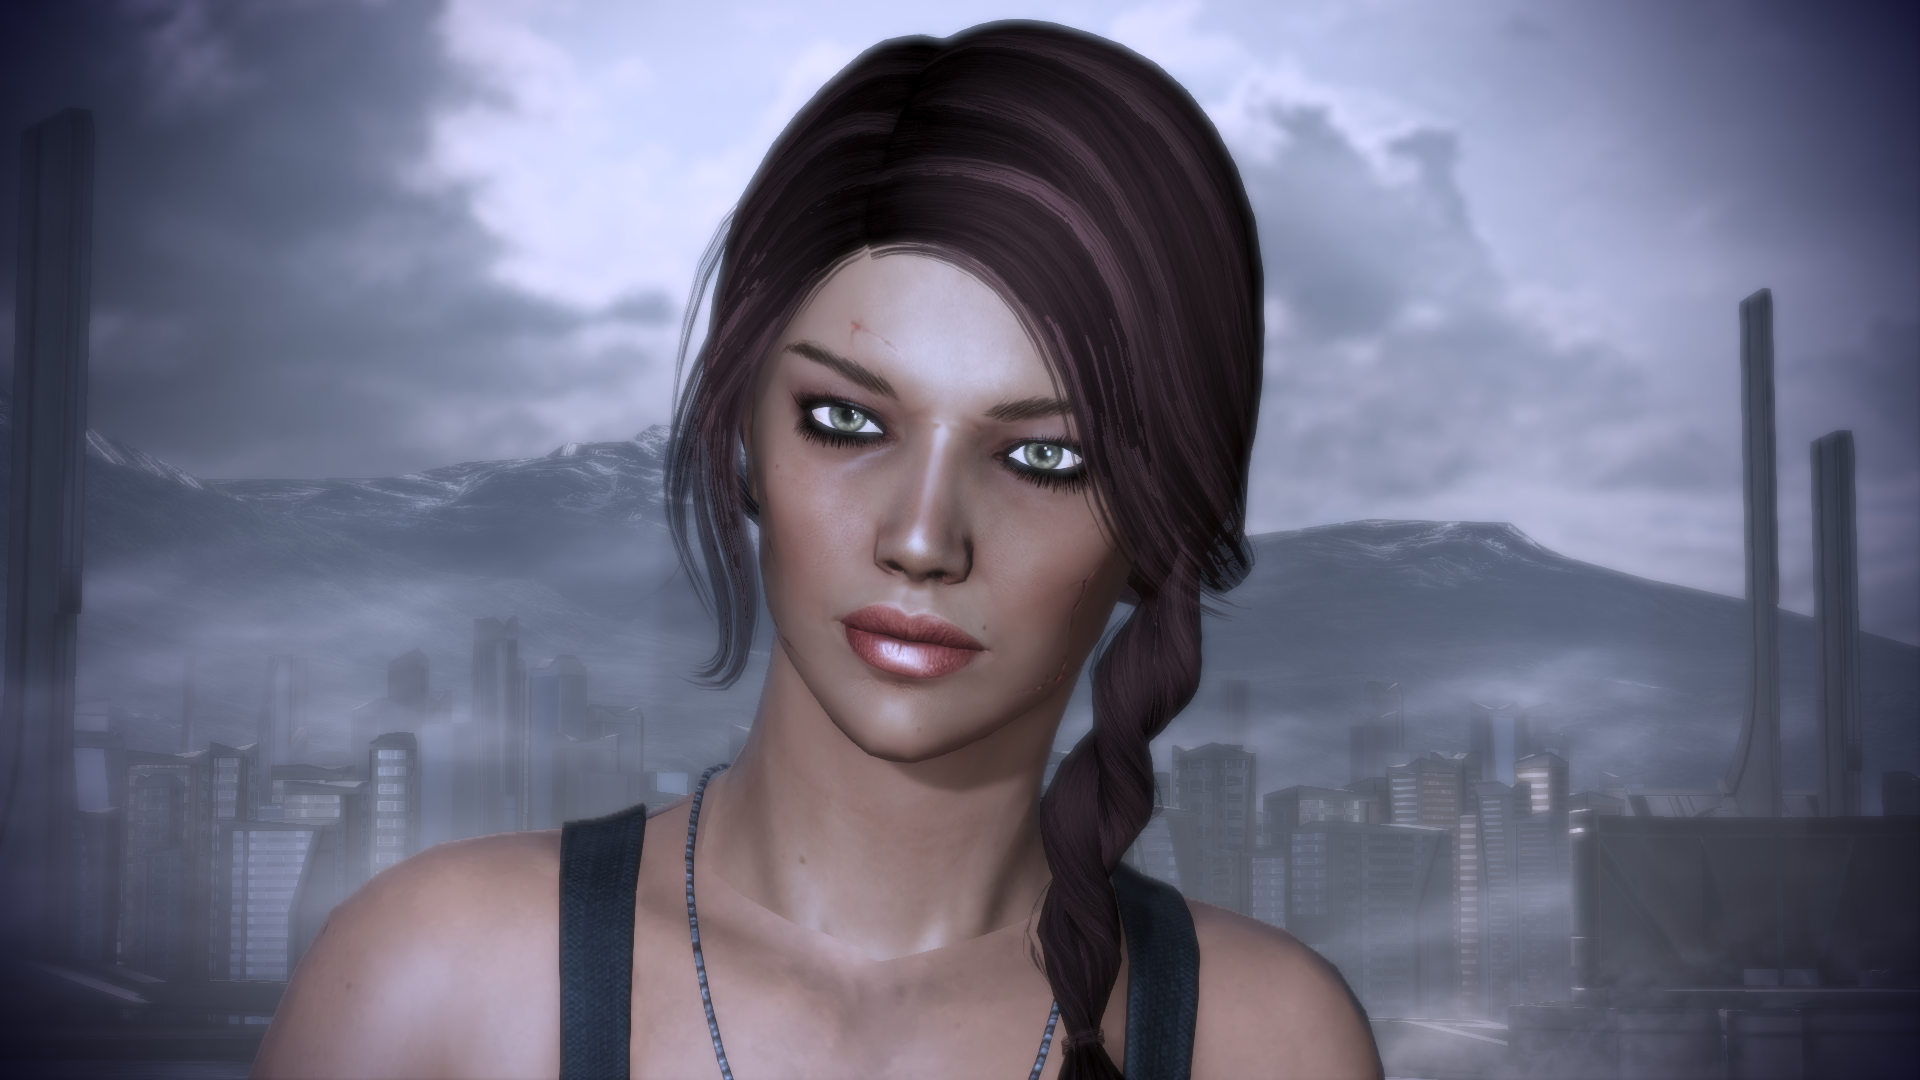 Ponytail hairstyles fallout 4 фото 85